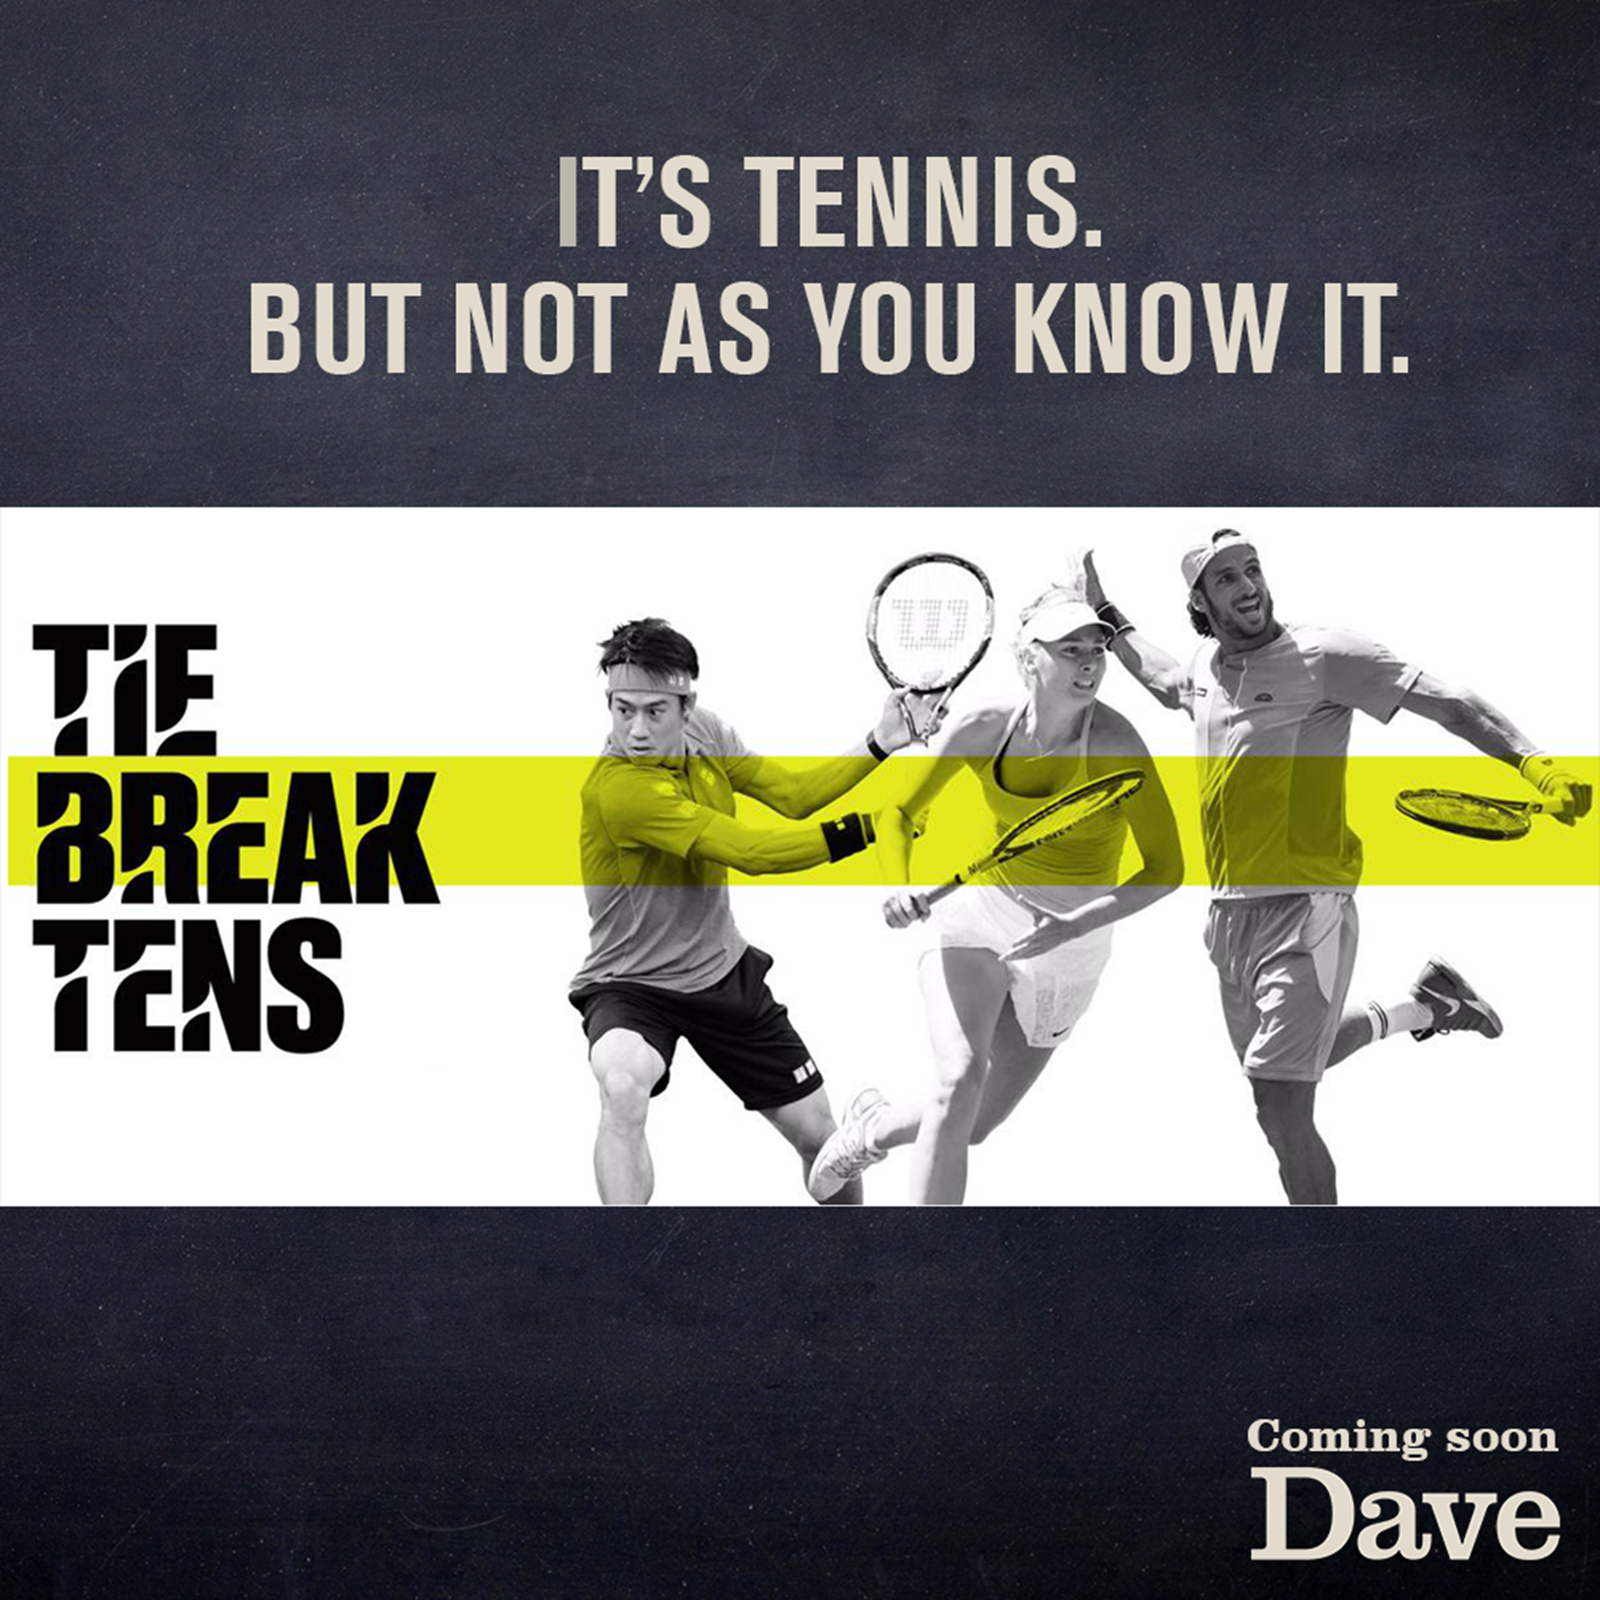 TIE BREAK TENS SERIES AWARD THREE YEAR HOST BROADCAST PRODUCTION CONTRACT TO SUNSET+VINE 